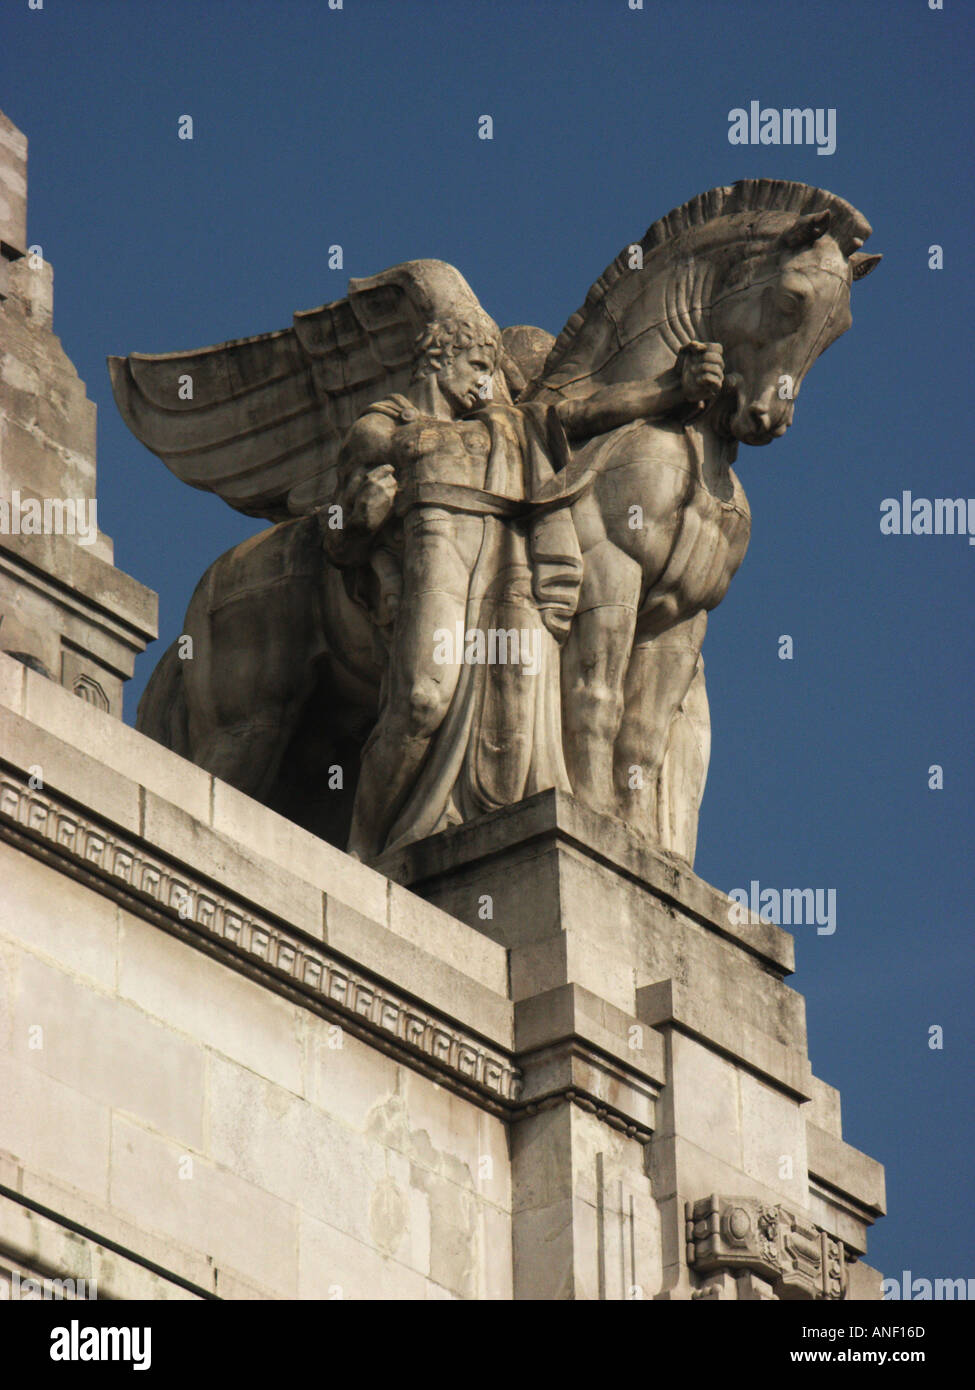 Fascist symbolism in the sculpture of Milan´s Mussolini era central railway station Stock Photo